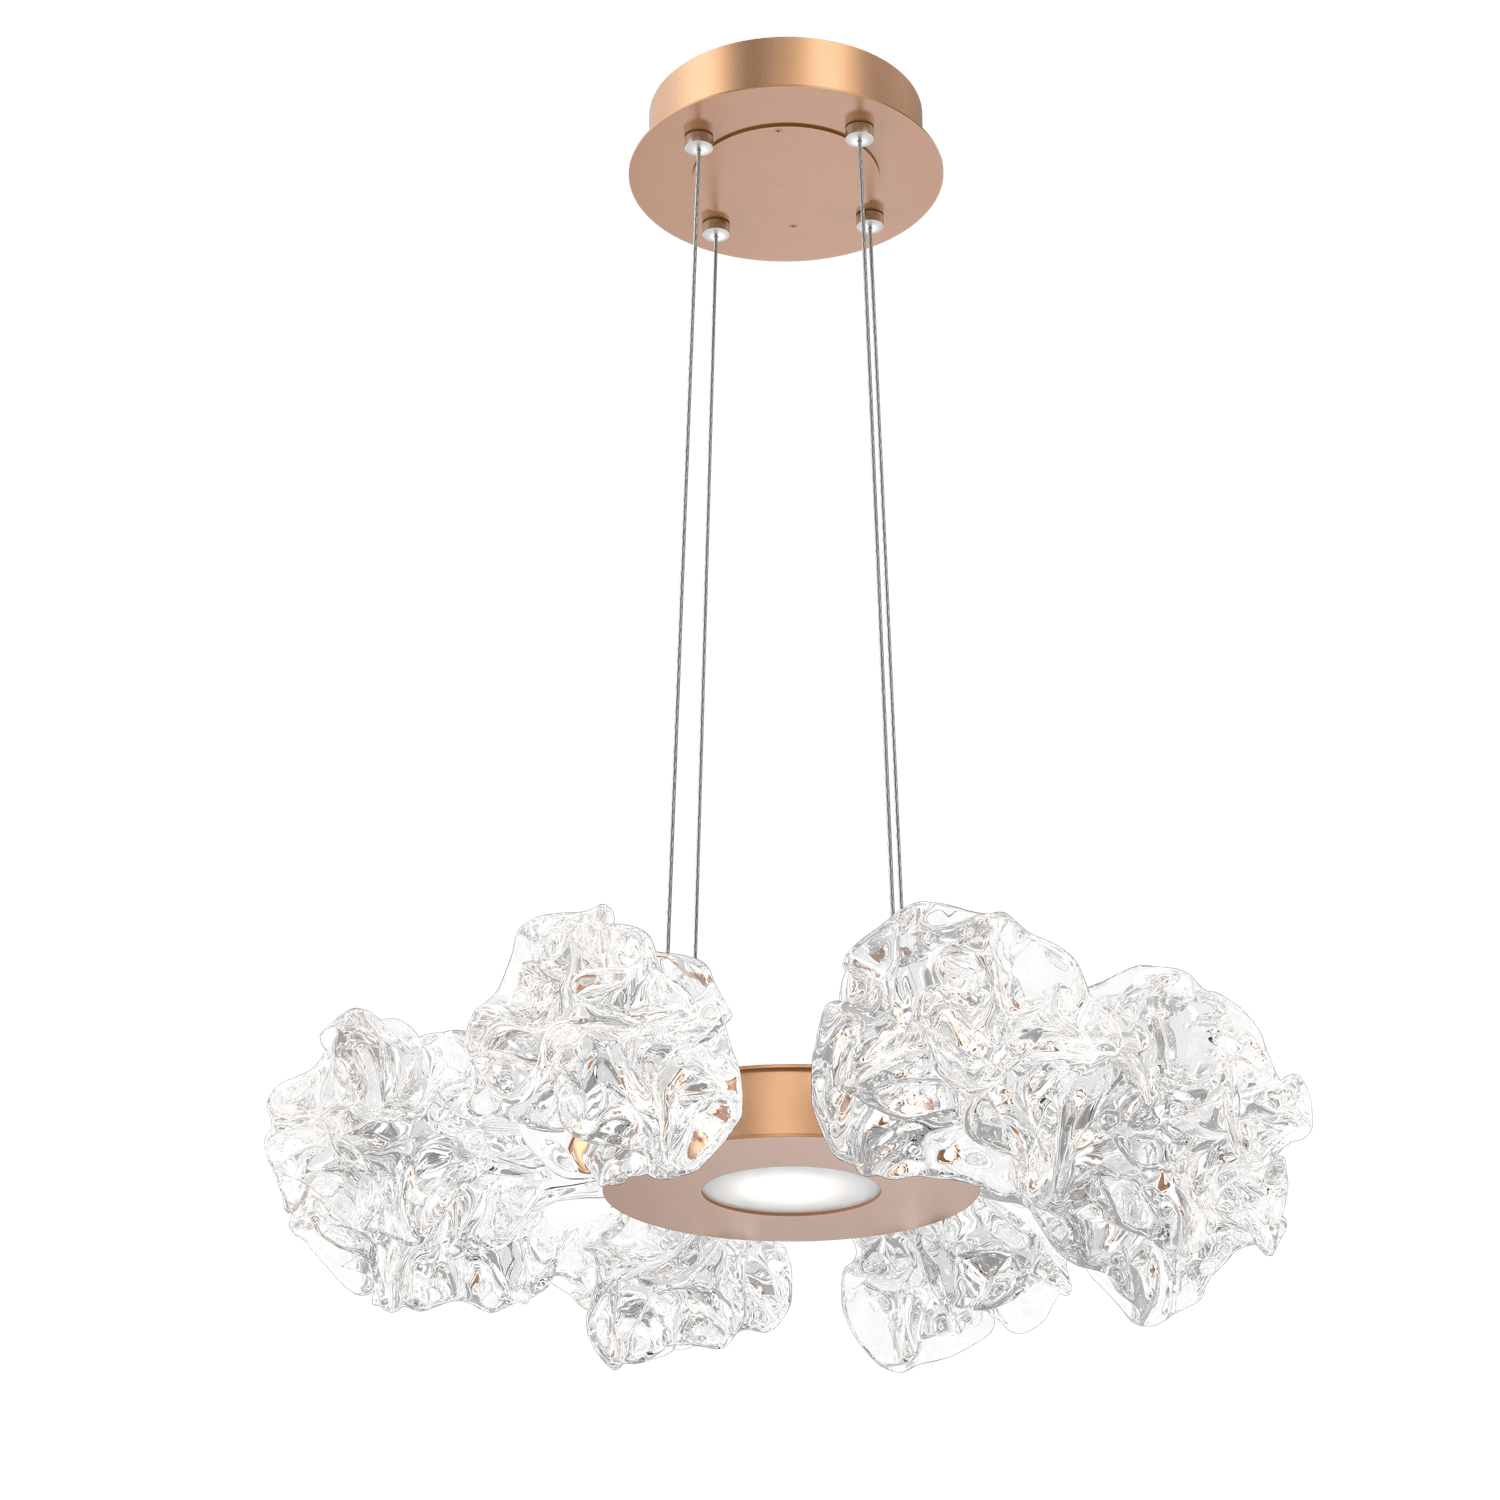 CHB0059-24-NB-Hammerton-Studio-Blossom-24-inch-radial-ring-chandelier-with-novel-brass-finish-and-clear-handblown-crystal-glass-shades-and-LED-lamping